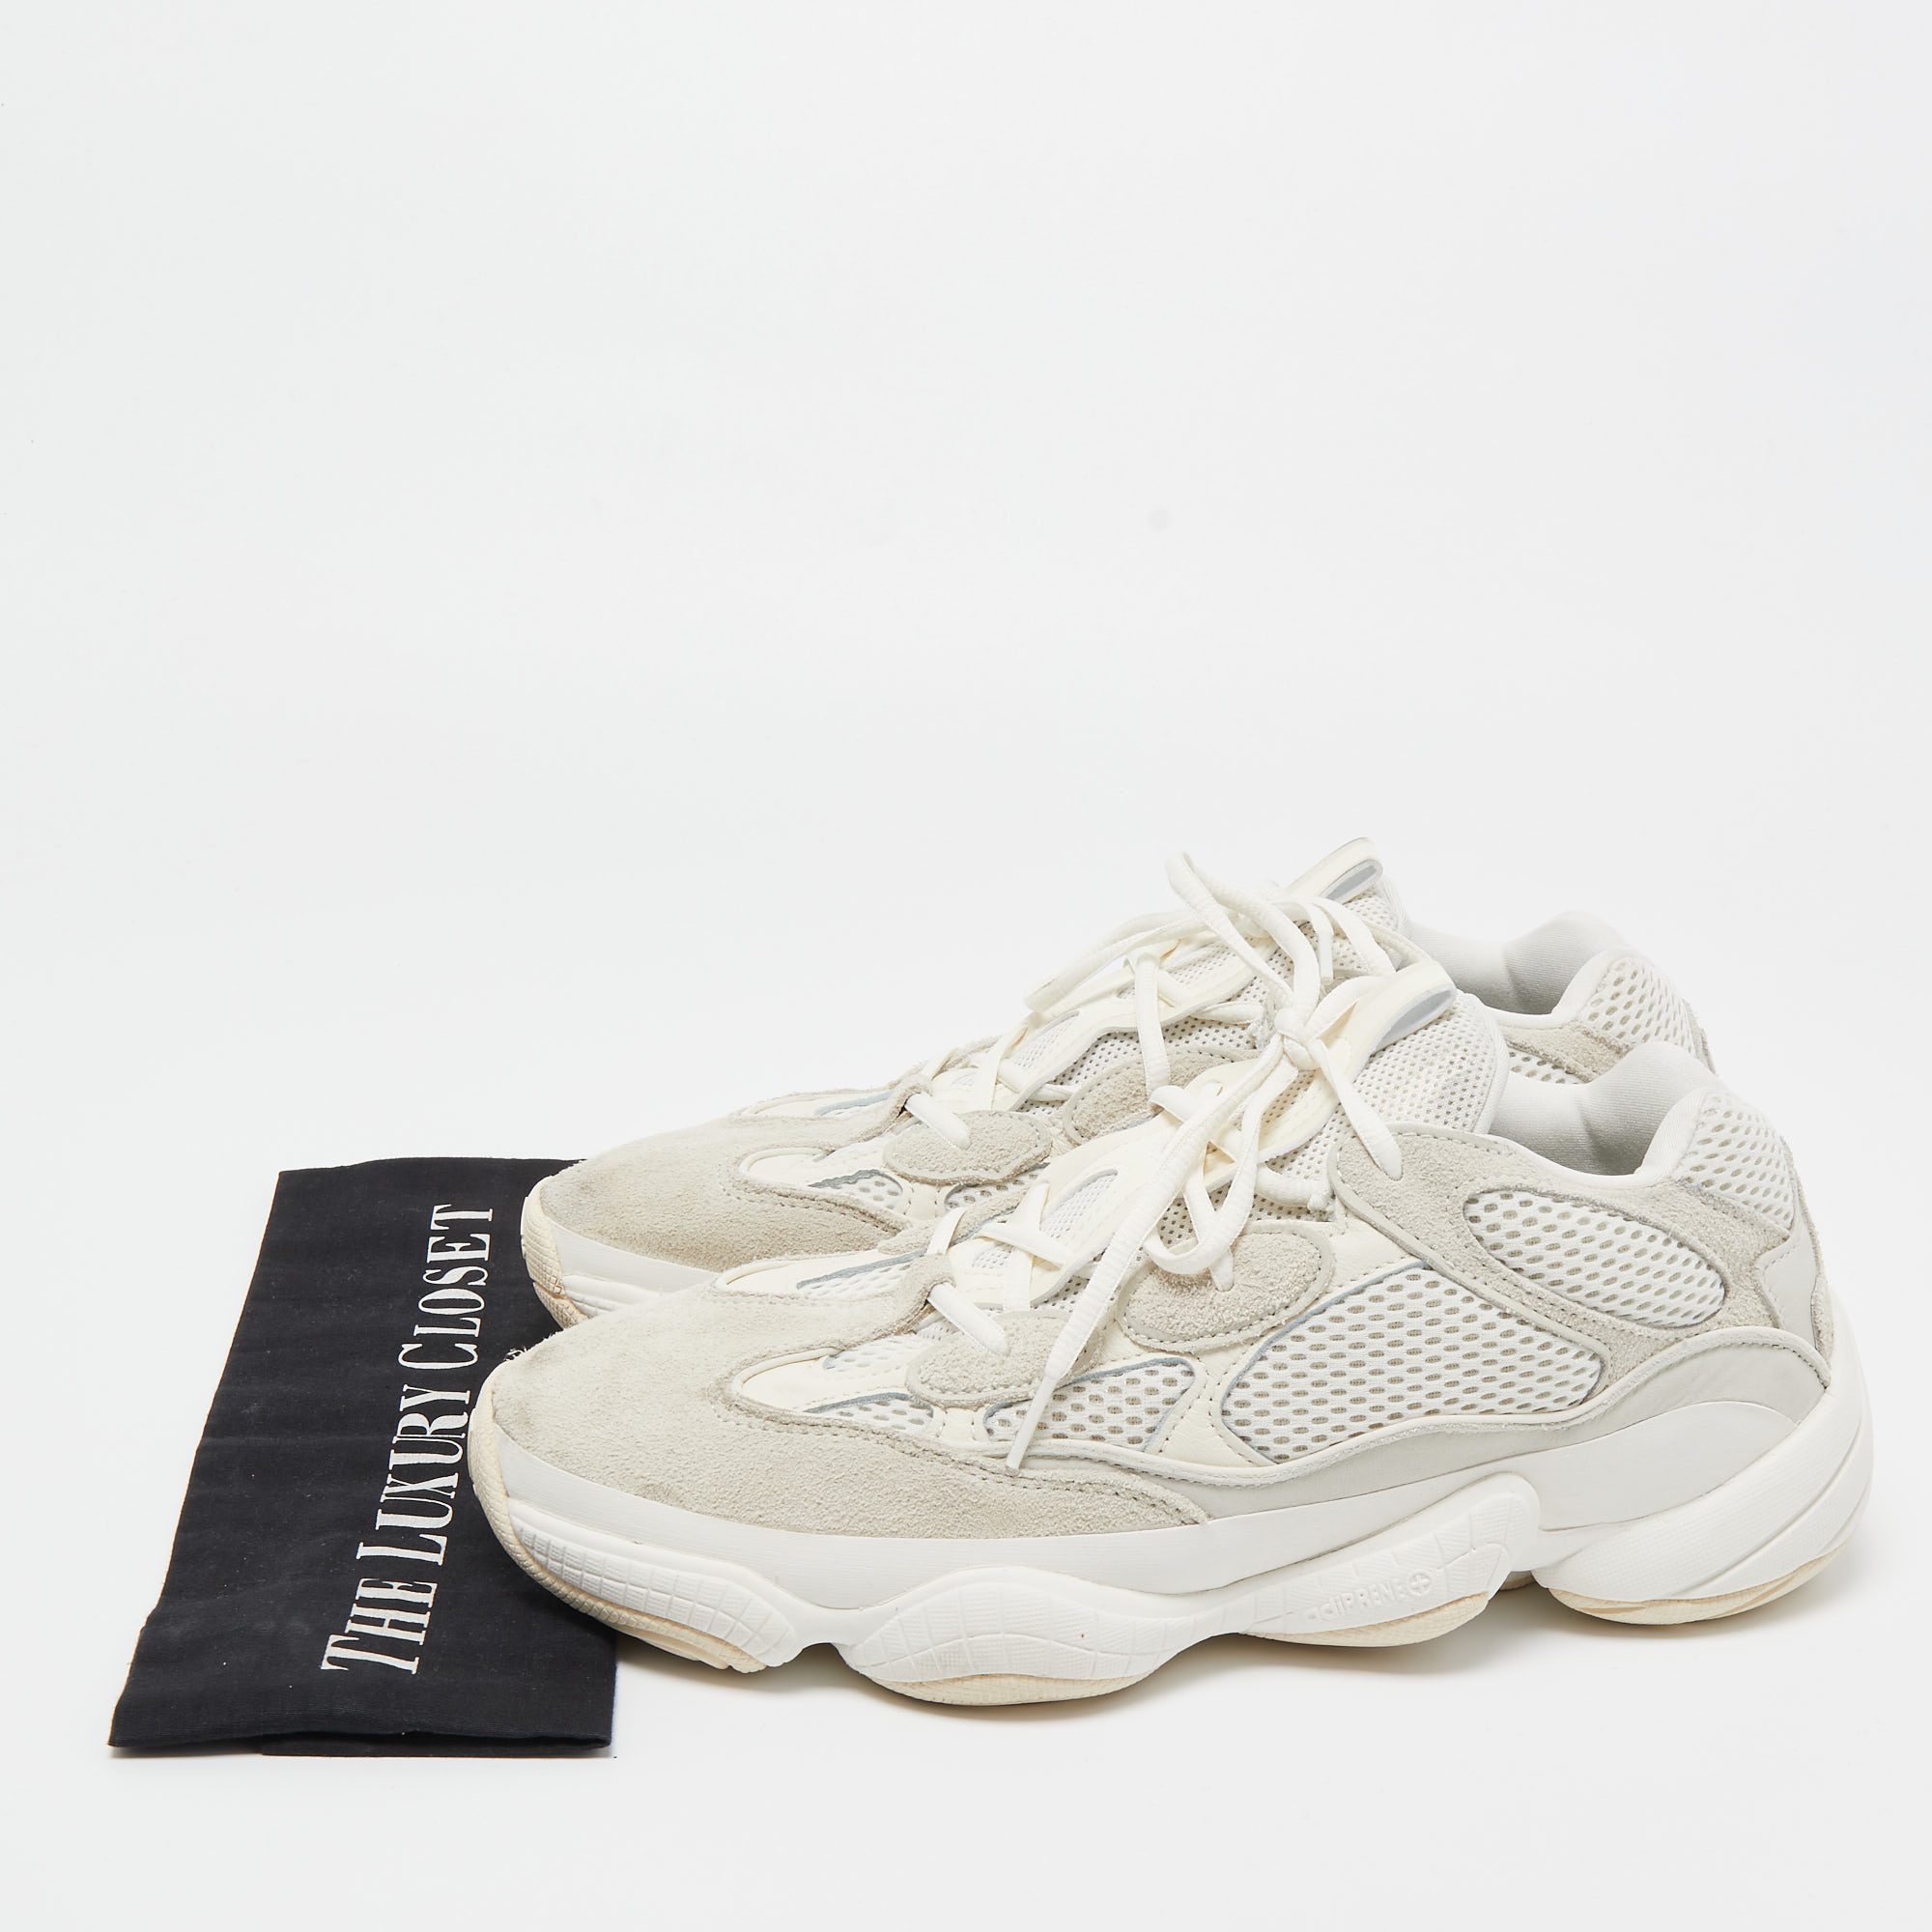 Yeezy X Adidas White Mesh And Suede Yeezy 500 Bone White Sneakers Size 45 1/3